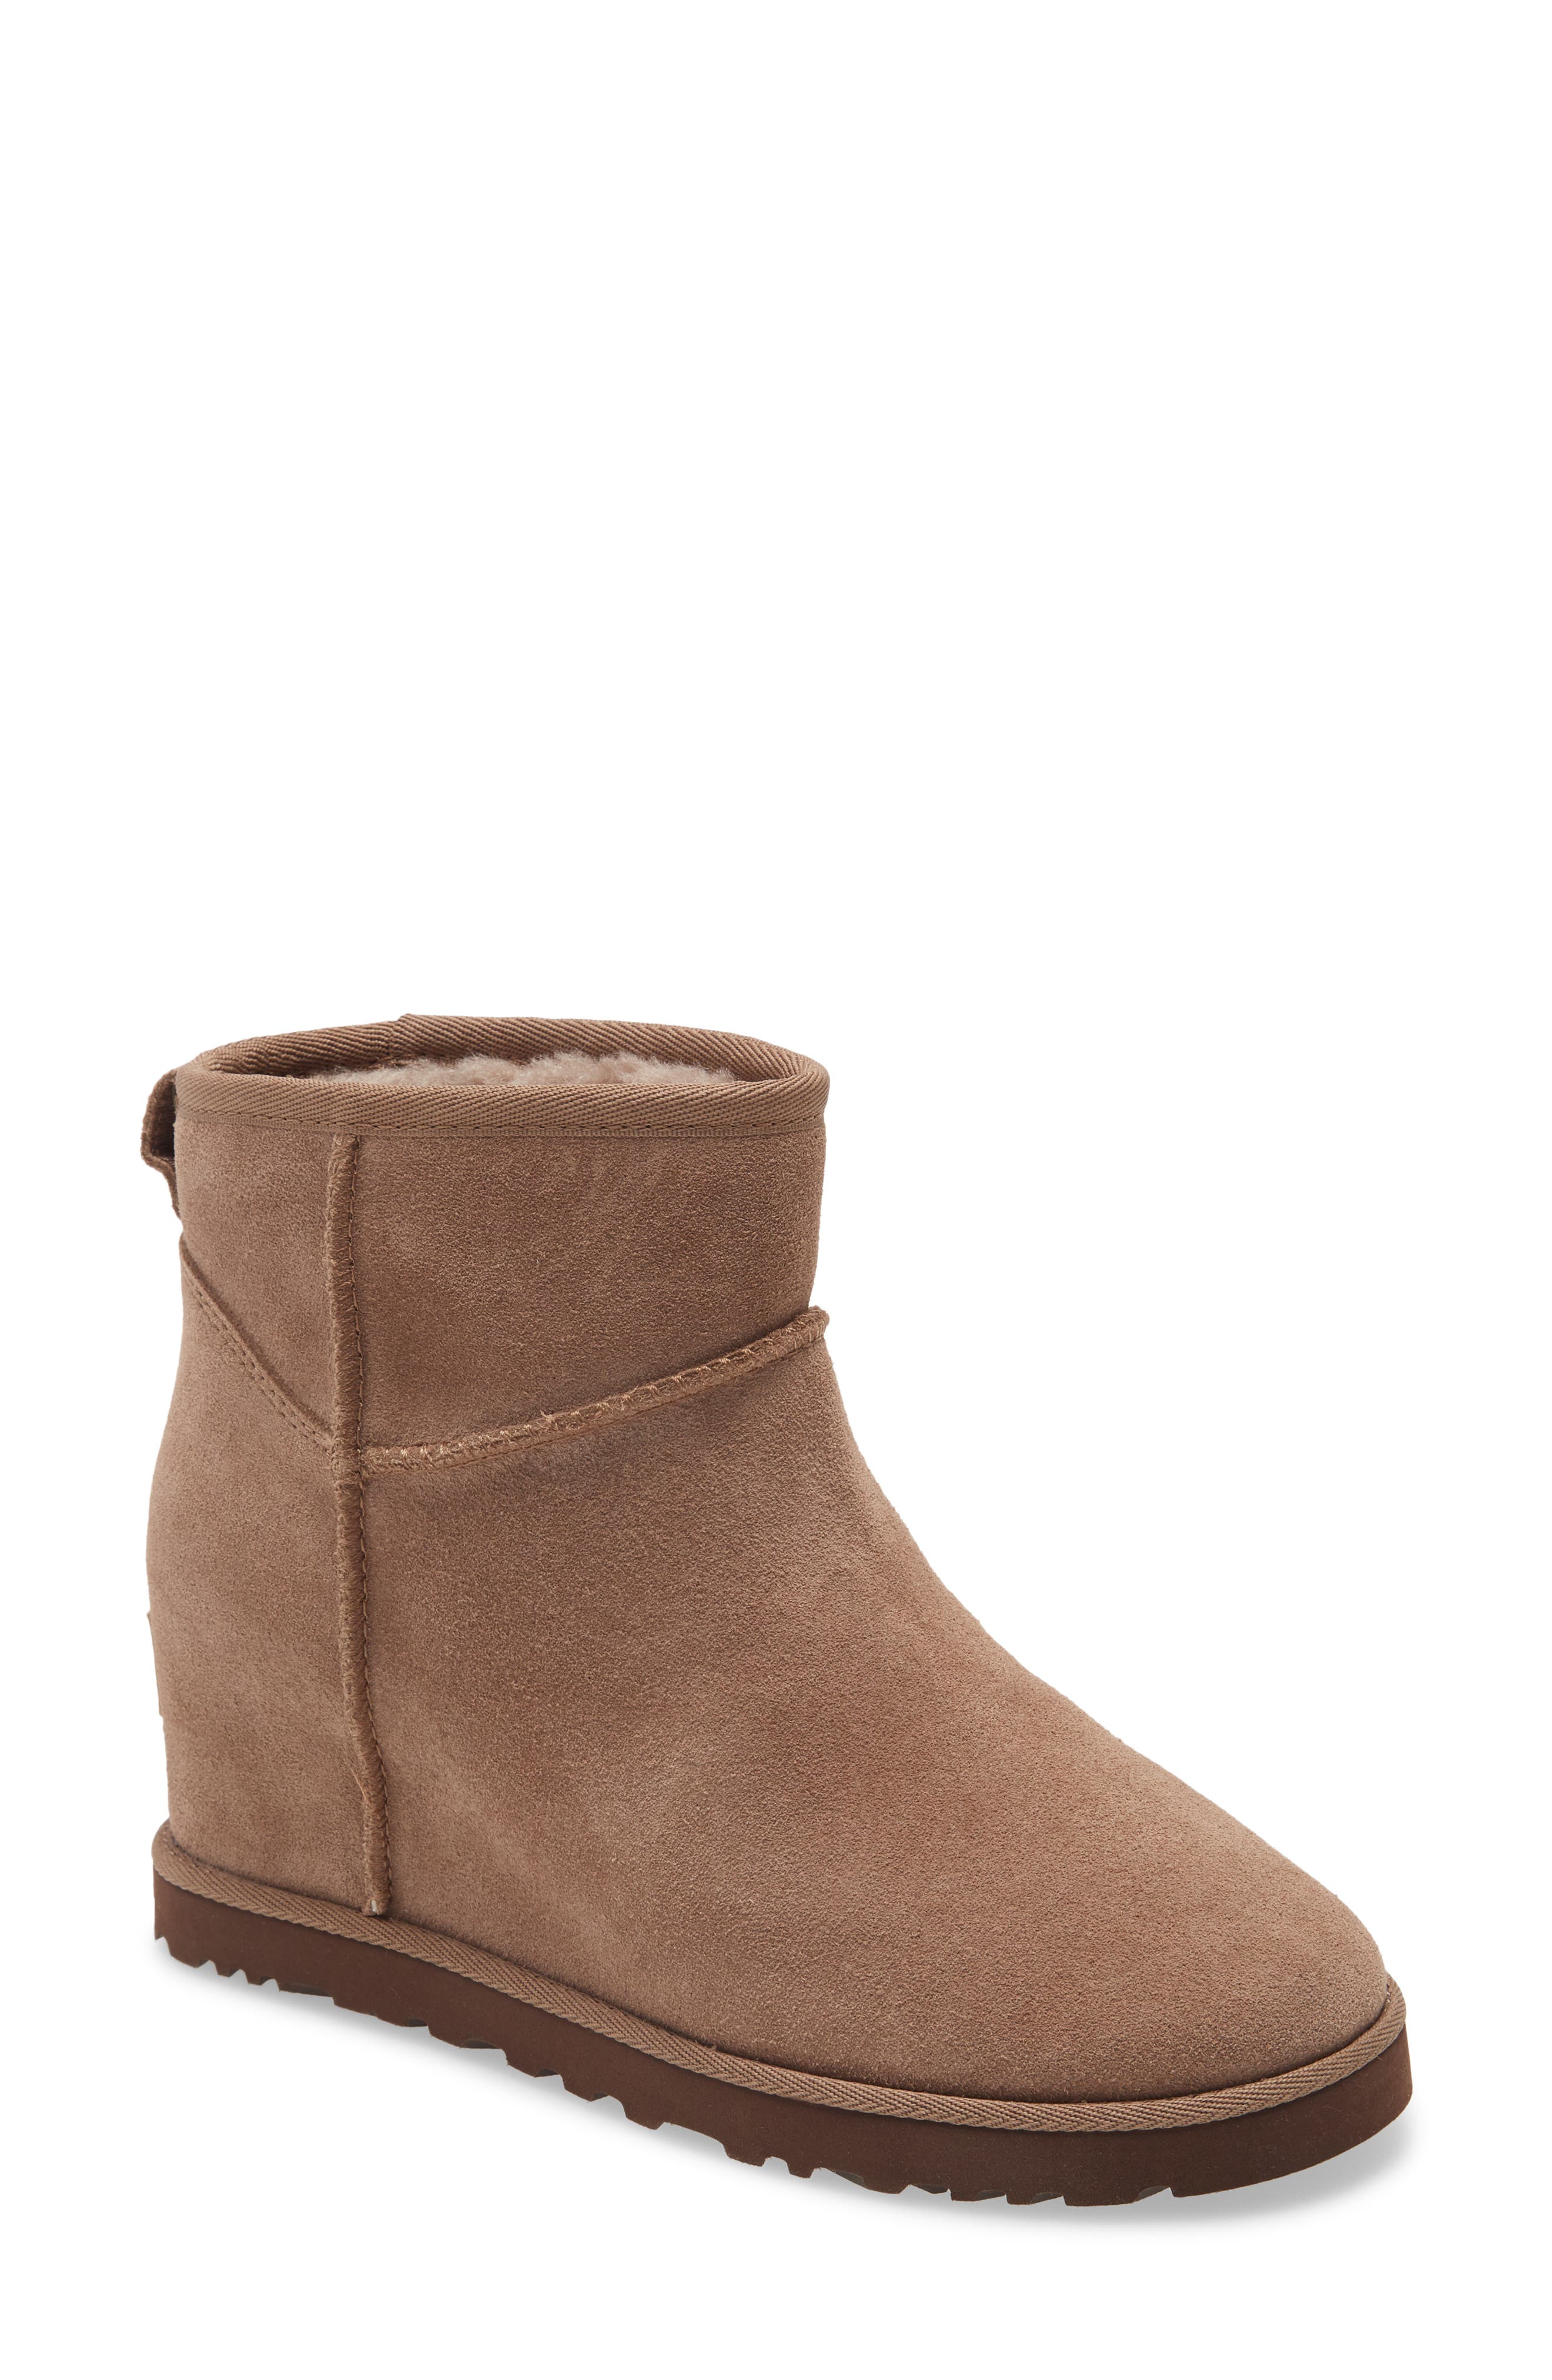 UGG® Booties \u0026 Ankle Boots | Nordstrom